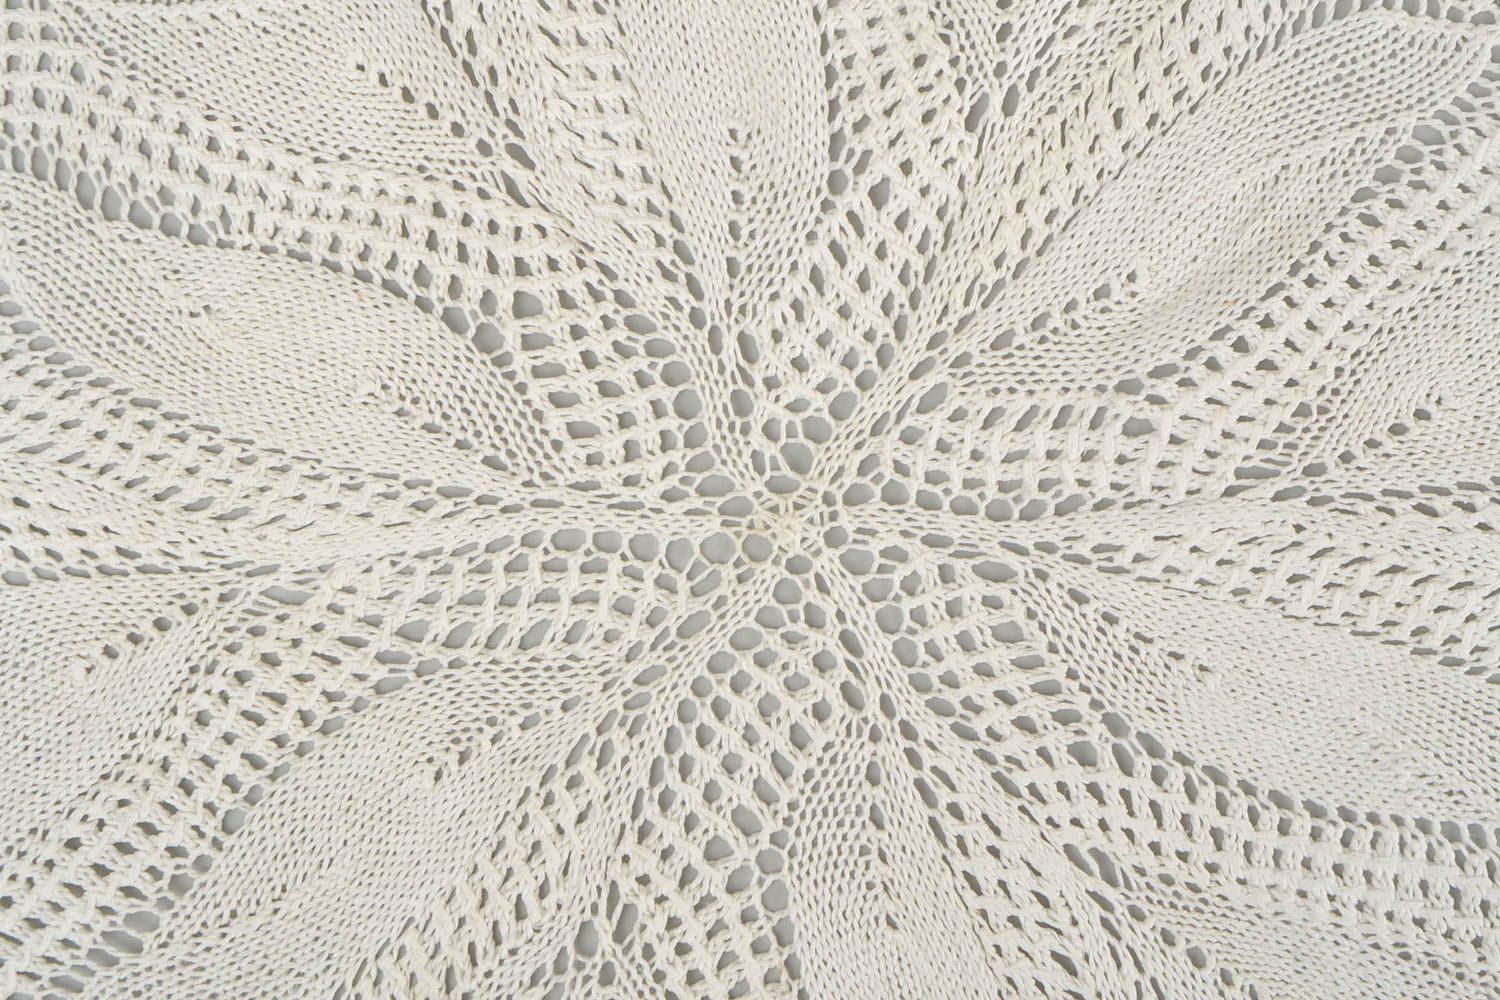 Handmade knitted tablecloth openwork table napkin vintage style interior decor photo 5